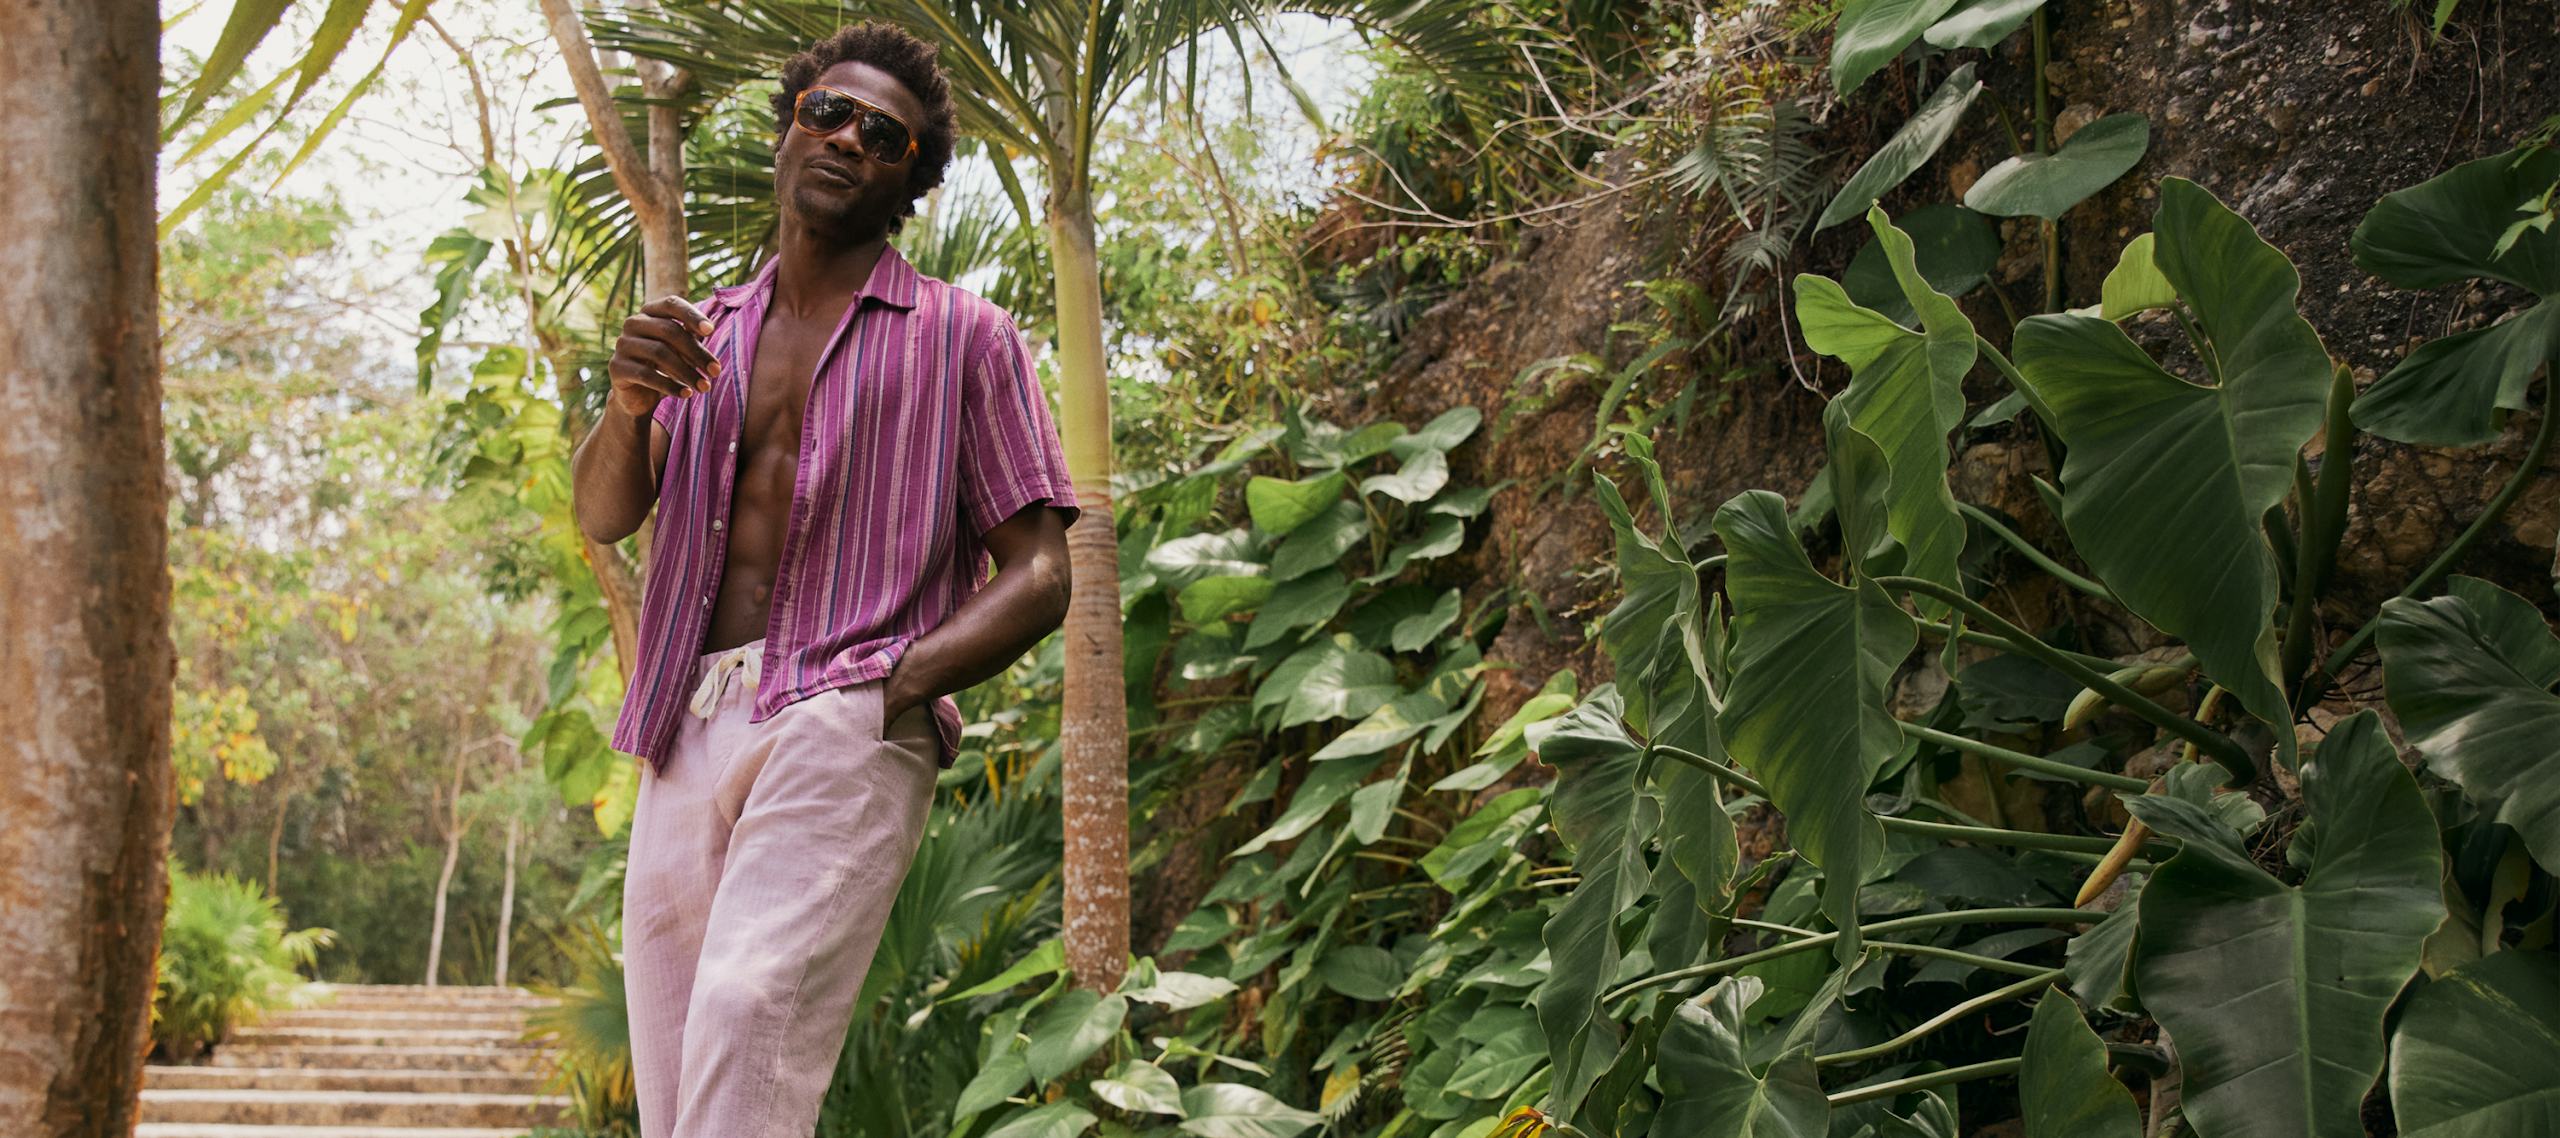 Model in tropics wearing Limited Edition Riviera Cabana Shirt in Burgundy Stripe